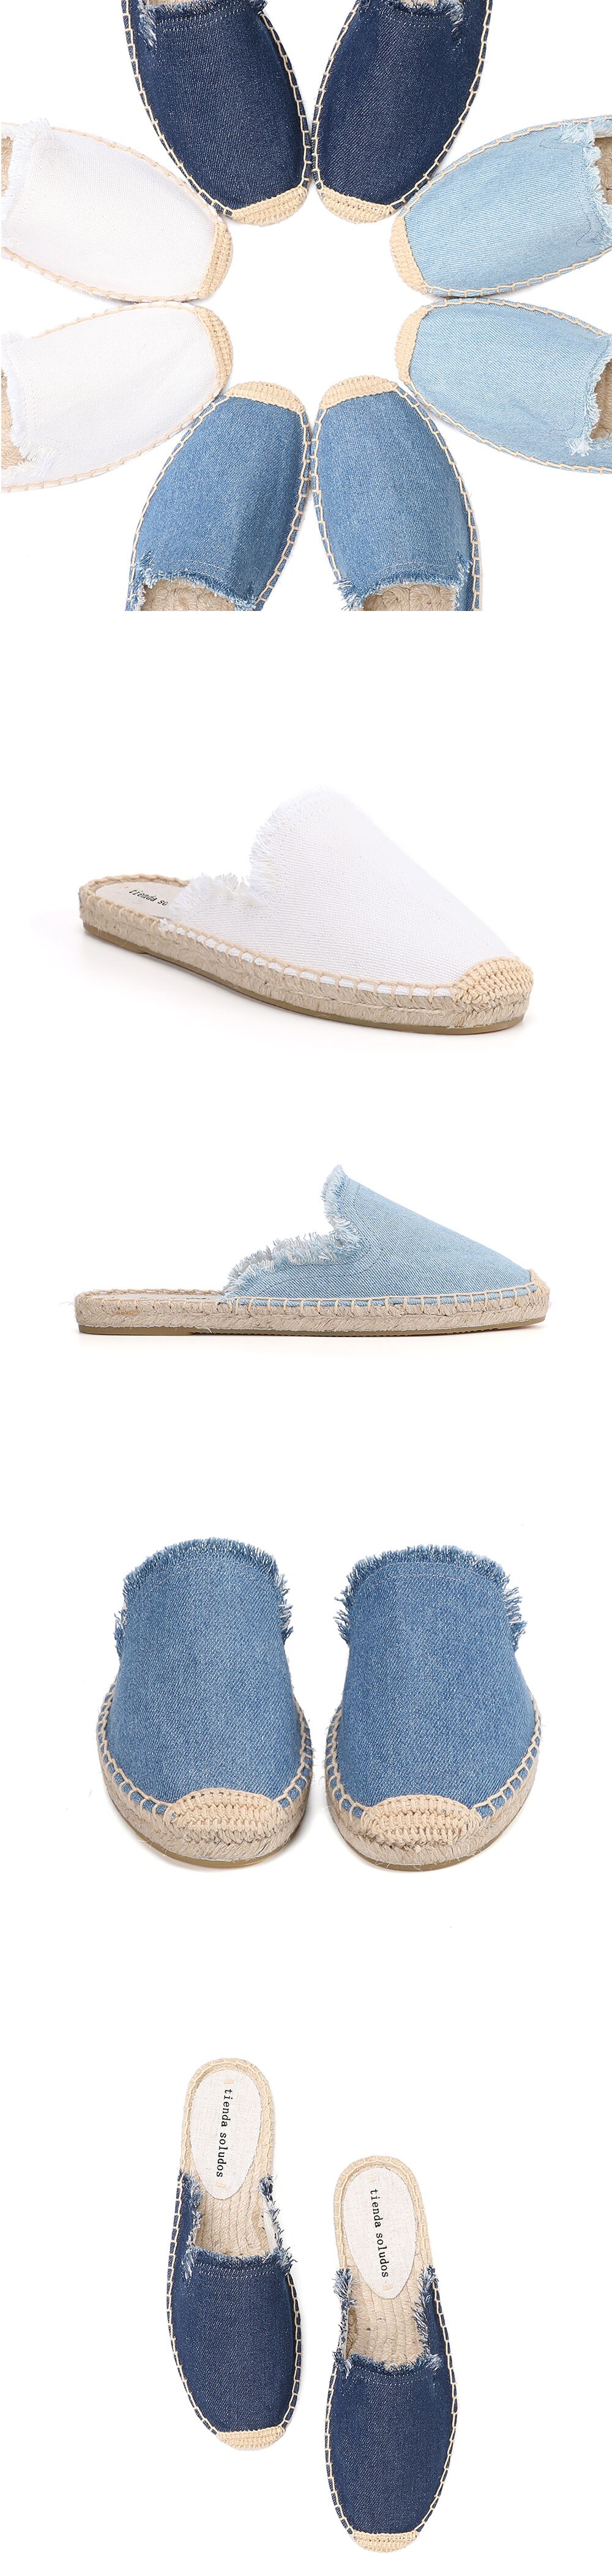 Woman Slippers Unicornio Terlik Solid Mules For Flat Limited New Denim Summer Rubber Cotton Fabric Pantufas Slides Shoes